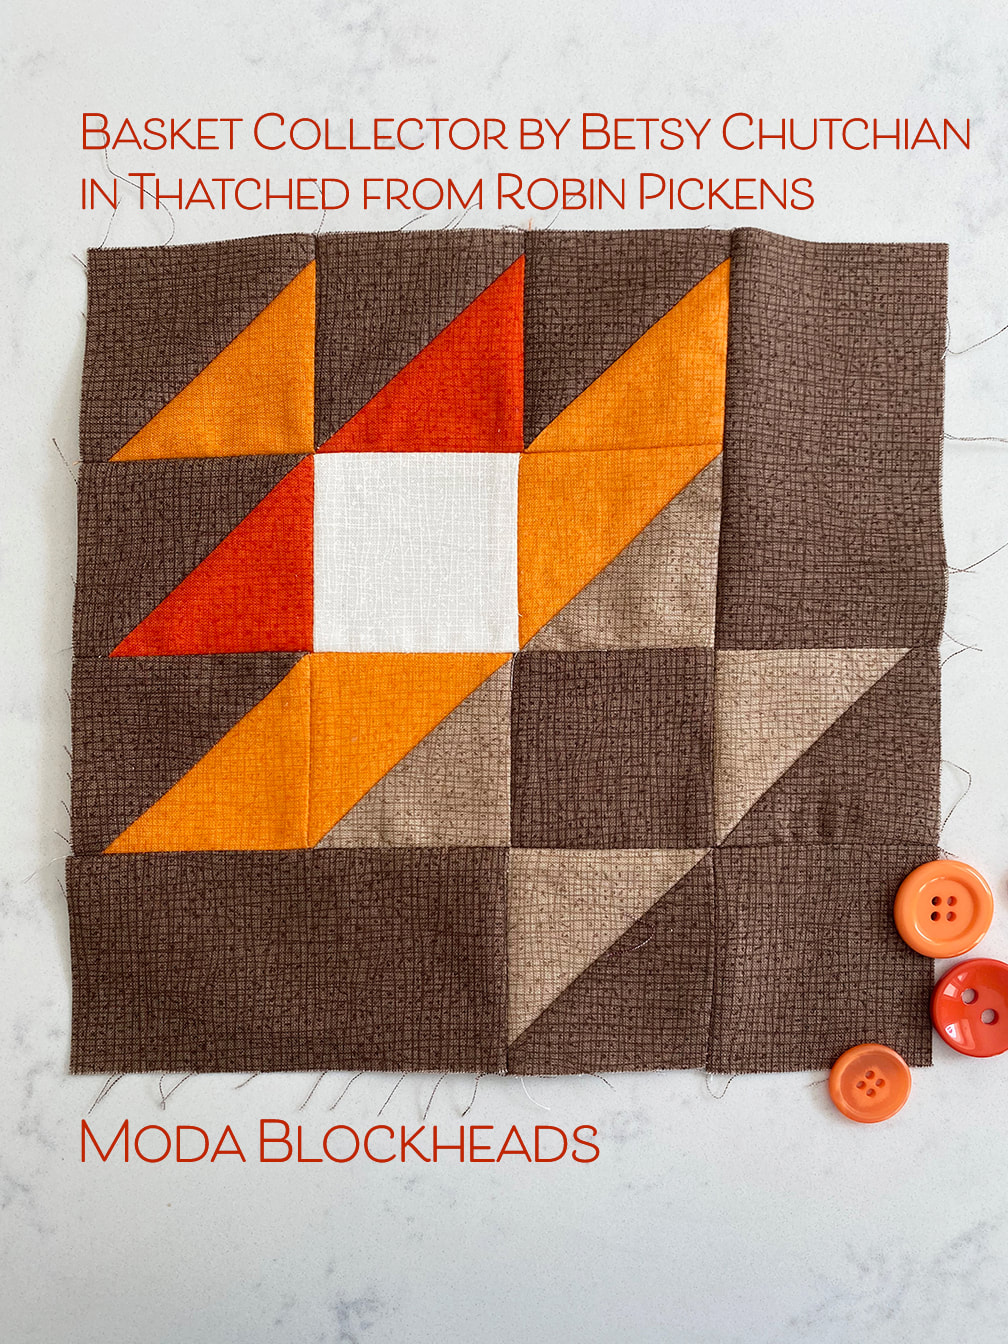 Basket Collector quilt block for Moda Blockheads from Betsy Chutchian done in Robin Pickens Thatched